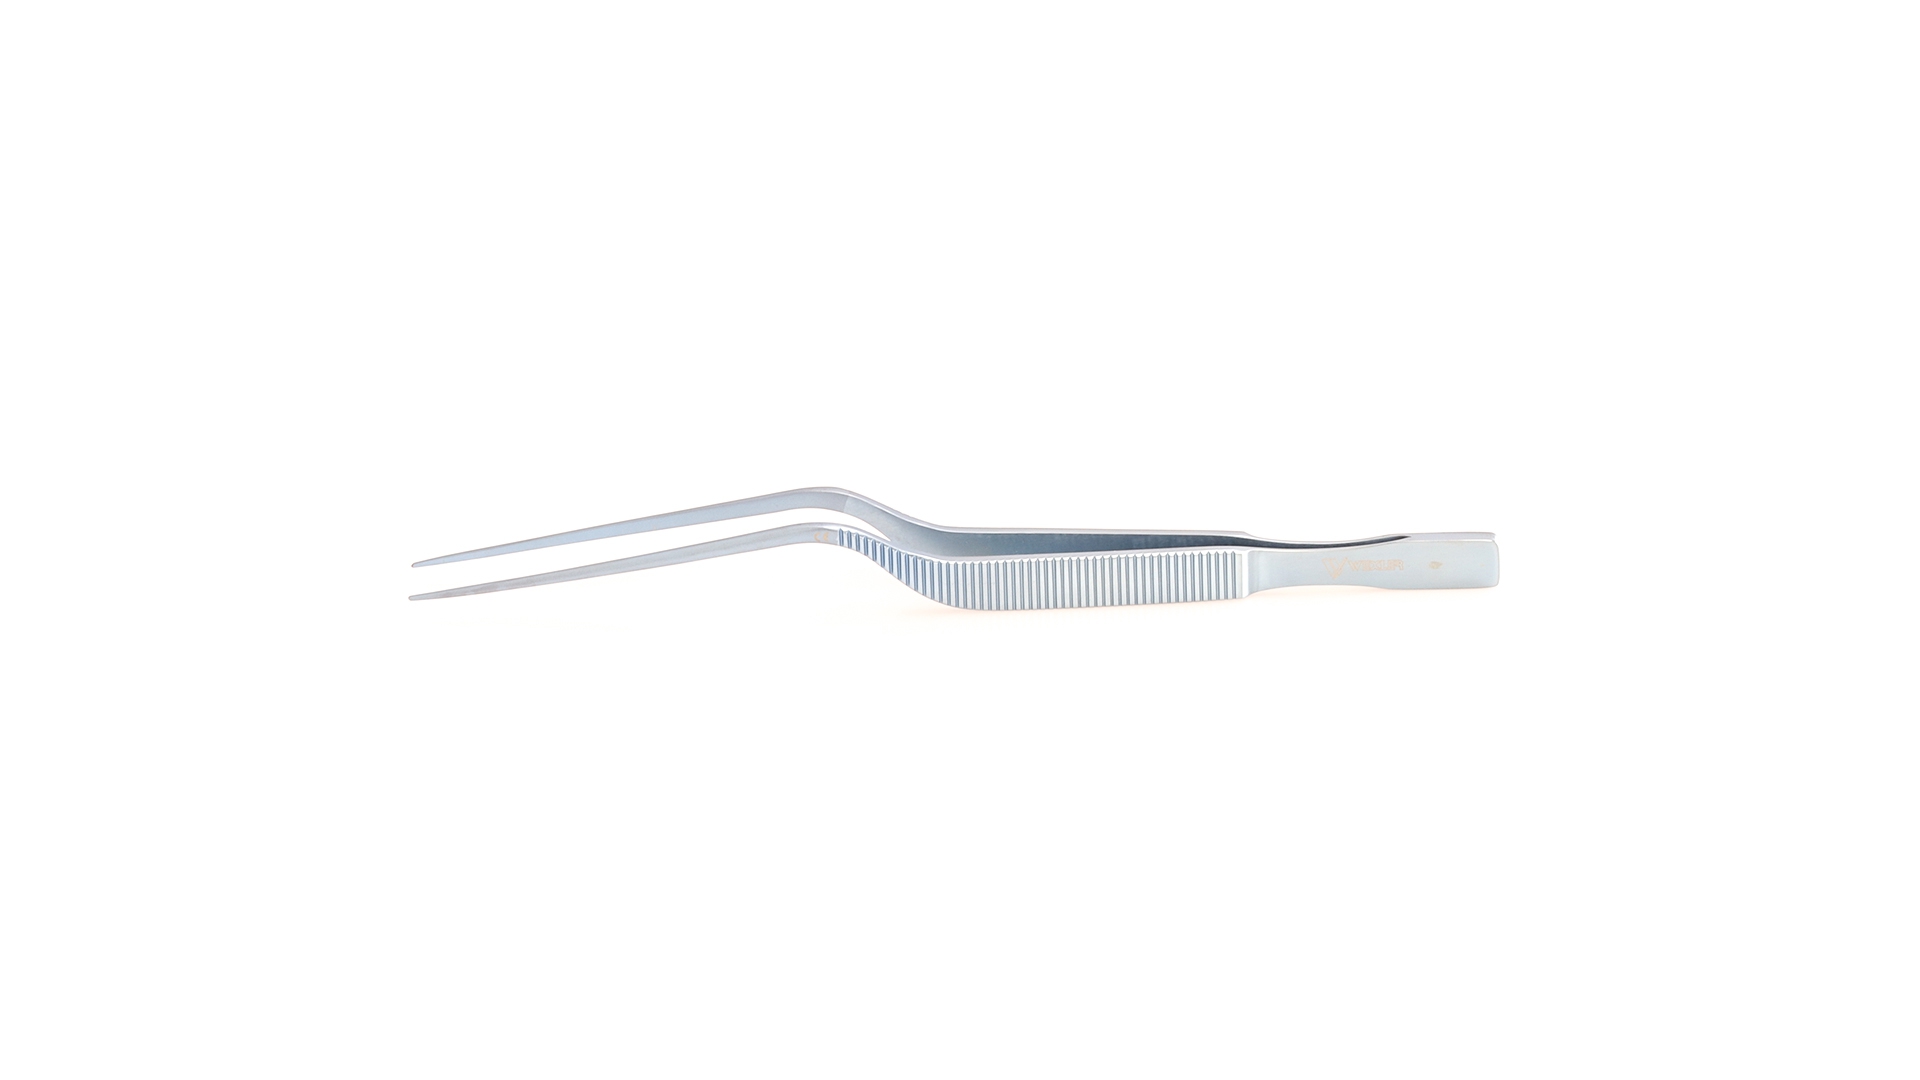 Micro Forceps - Straight 1mm tips